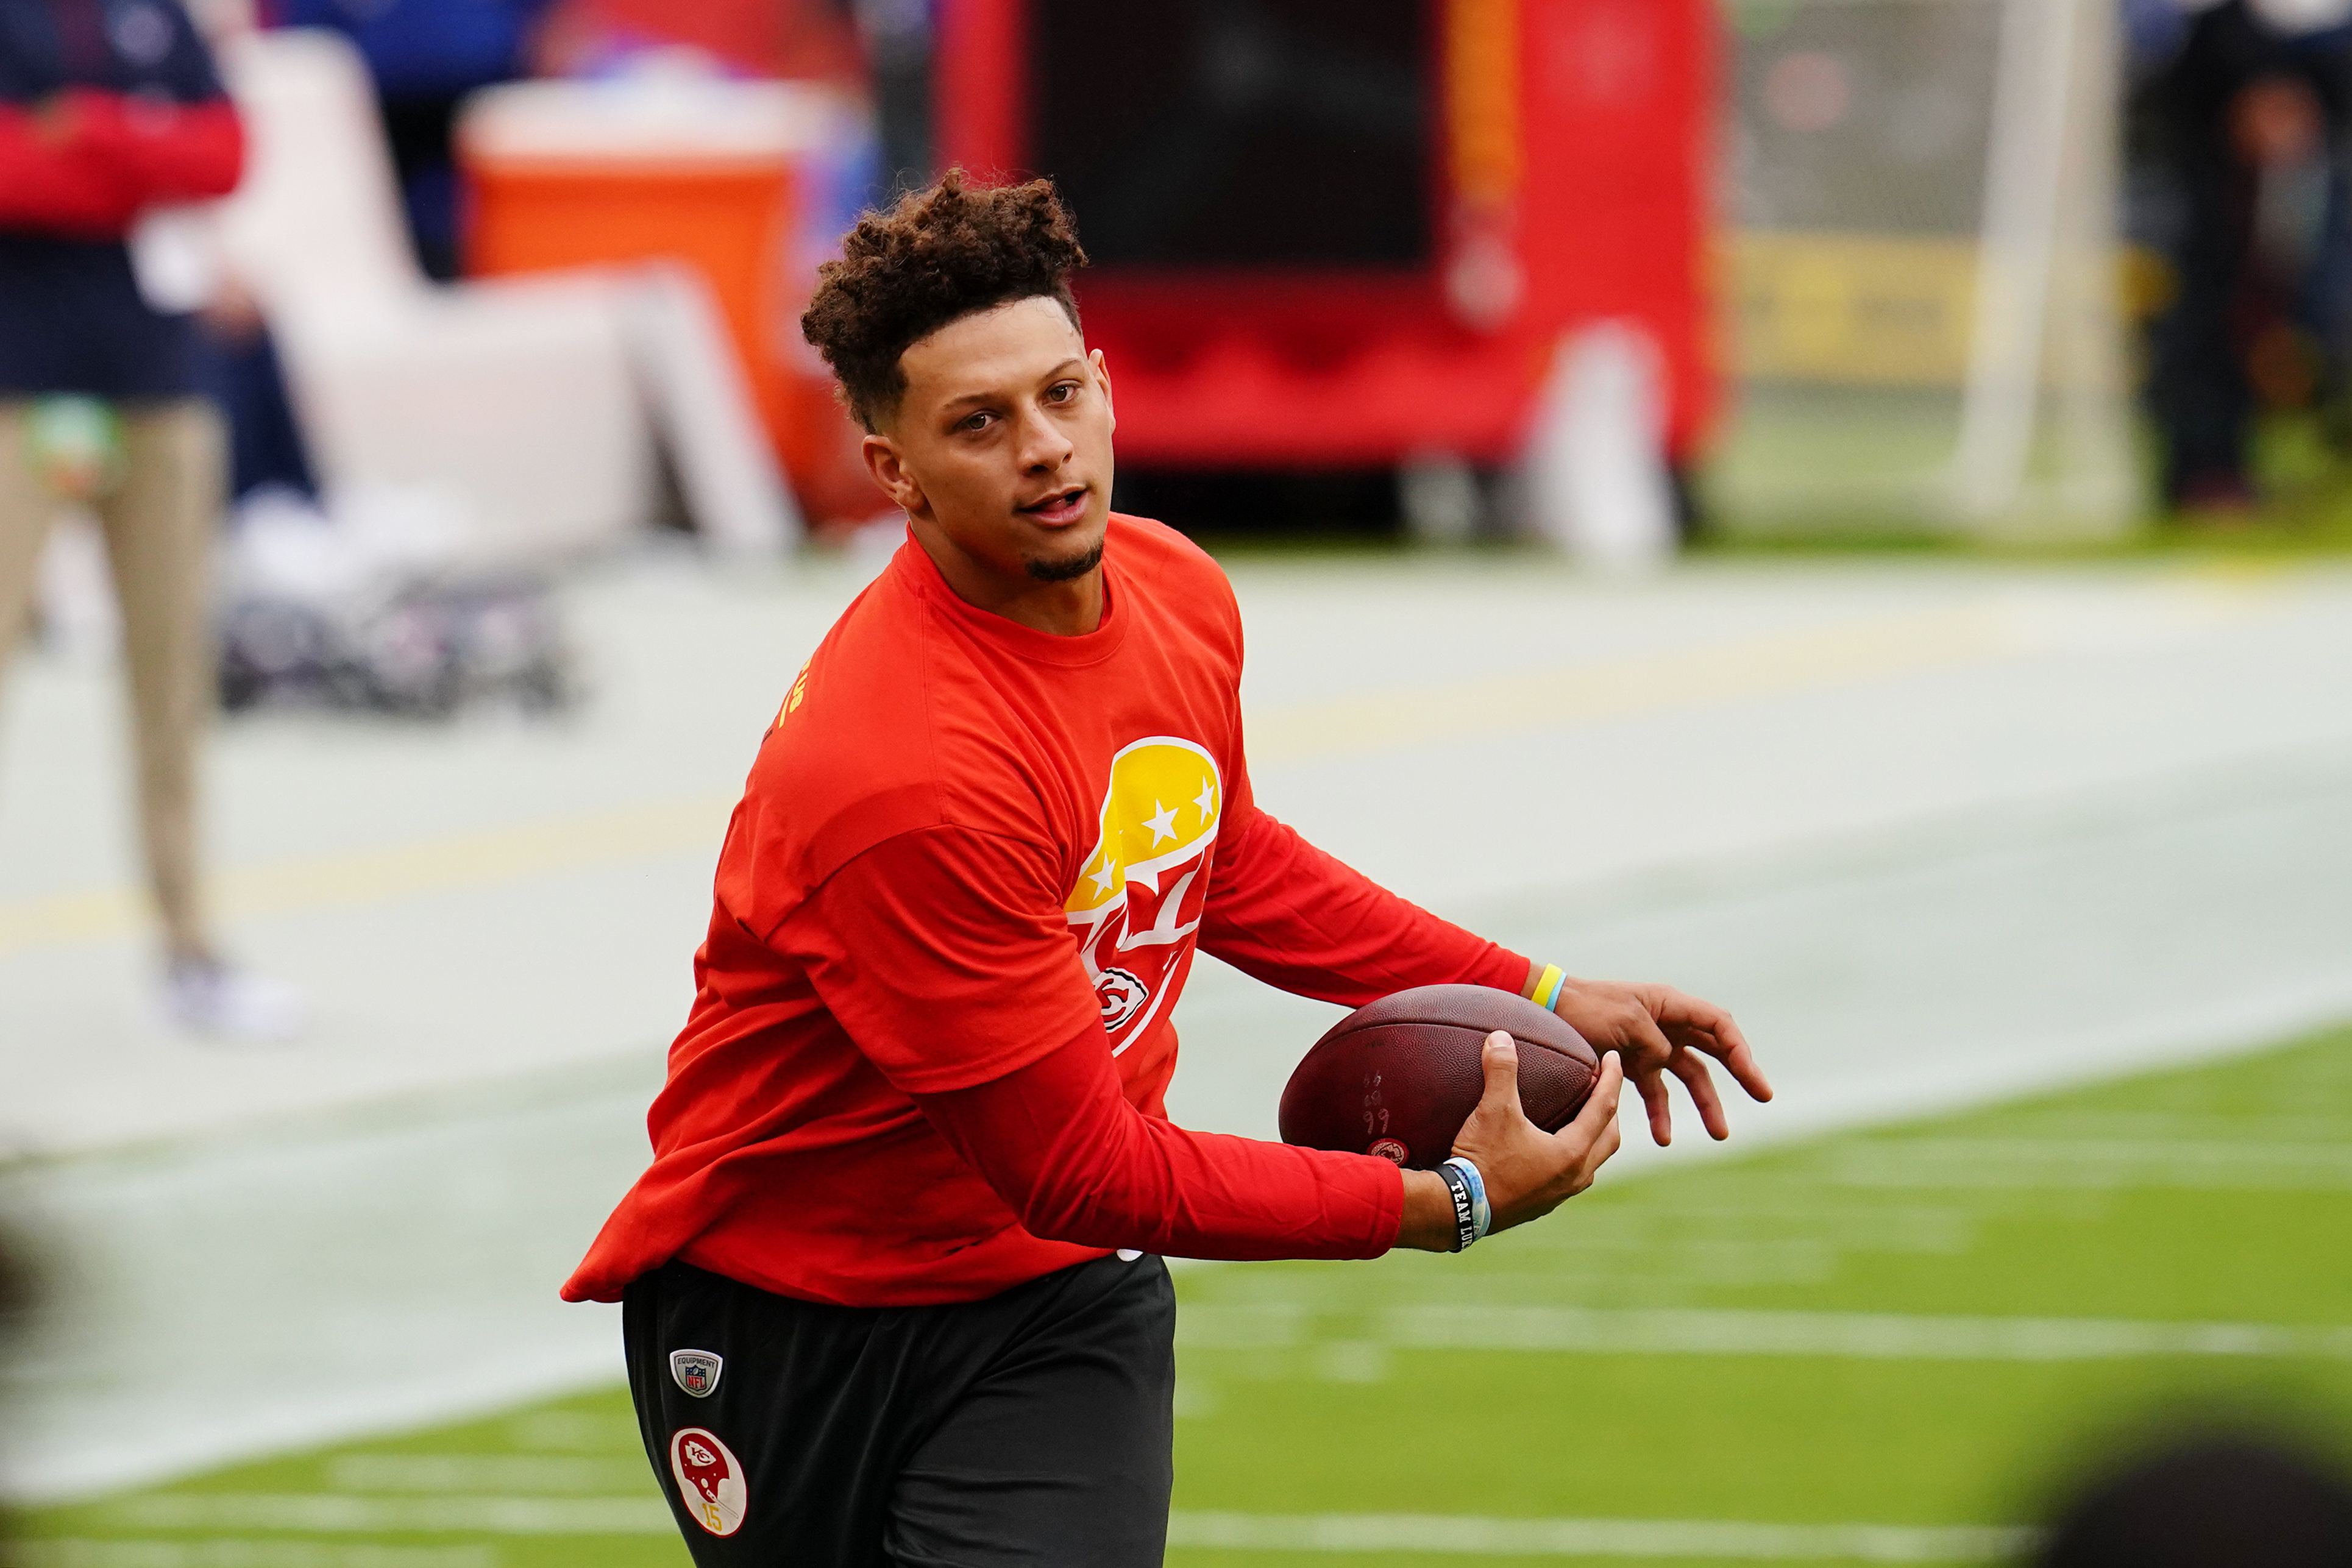 Patrick Mahomes effortlessly snags a pass with a single hand before an NFL matchup against the Houston Texans on September 10, 2020, in Kansas City | Source: Getty Images